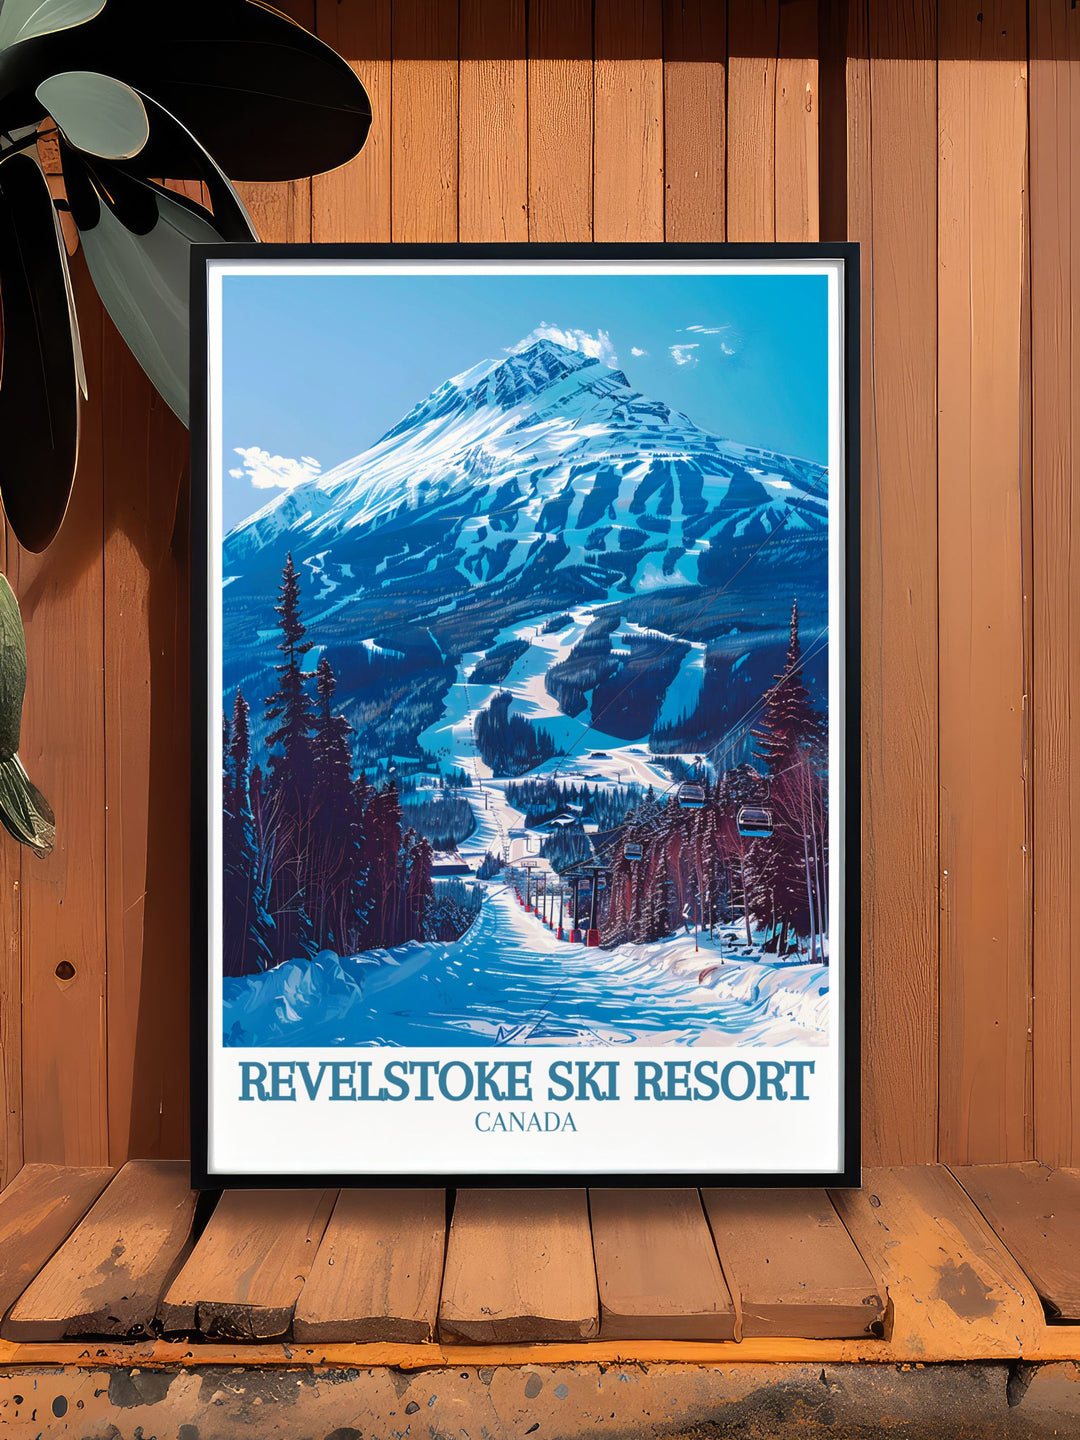 Framed Print Art of Mount Mackenzie and the Revelation Gondola cable car. This Skiing Wall Art brings the beauty and thrill of Revelstoke Canada into your home. A perfect addition to any art collection or home decor.